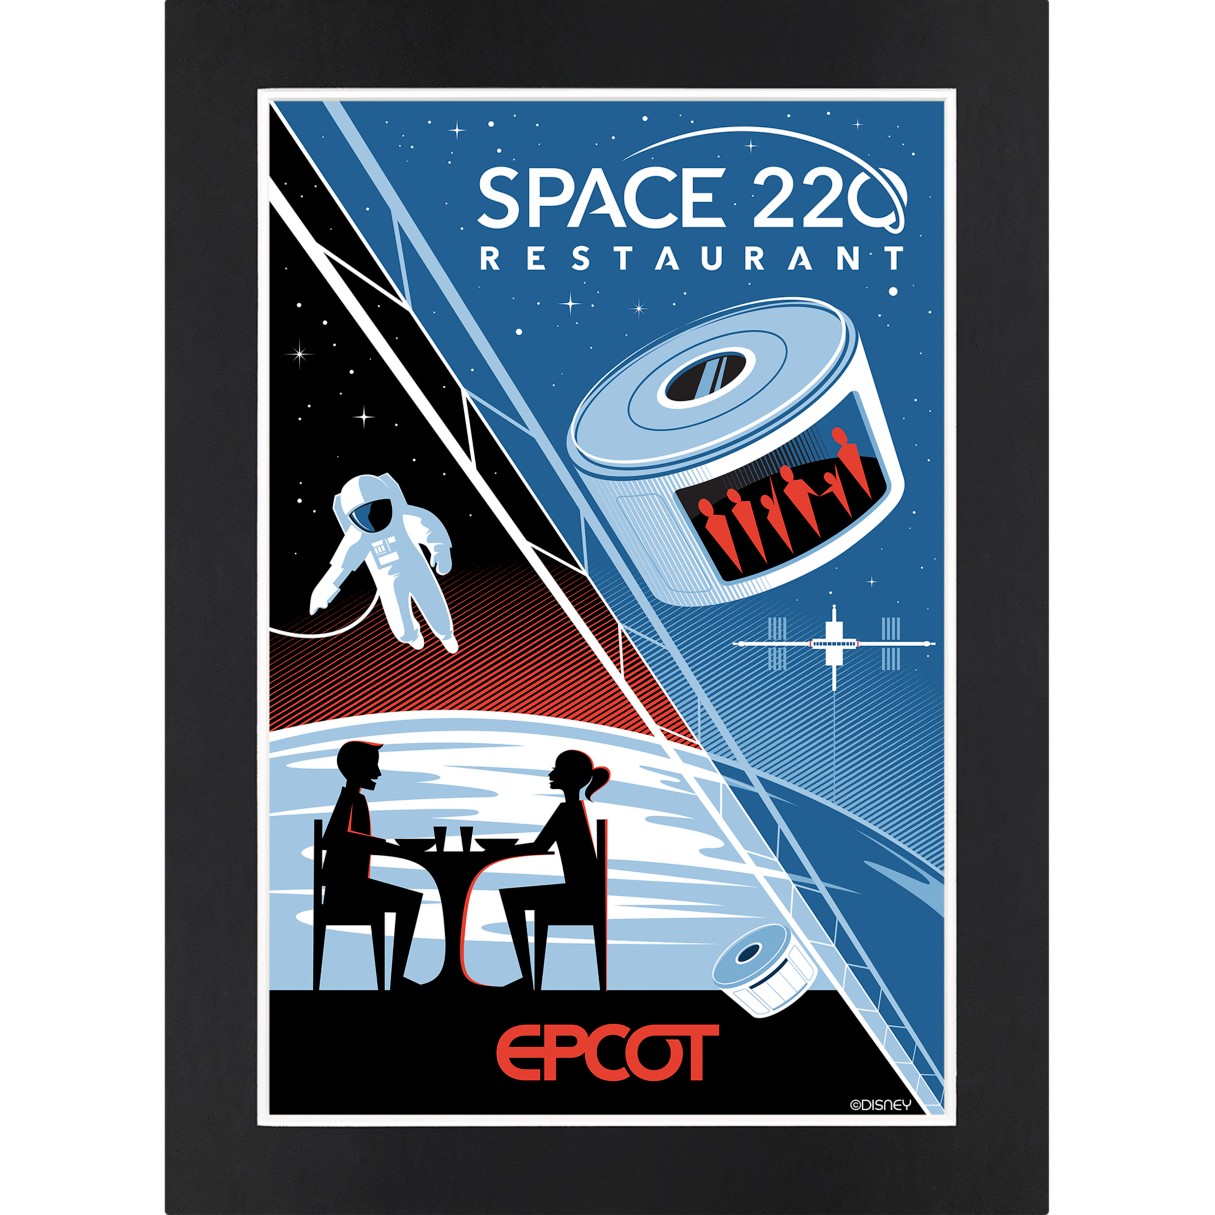 EPCOT Space 220 Restaurant Matted Print